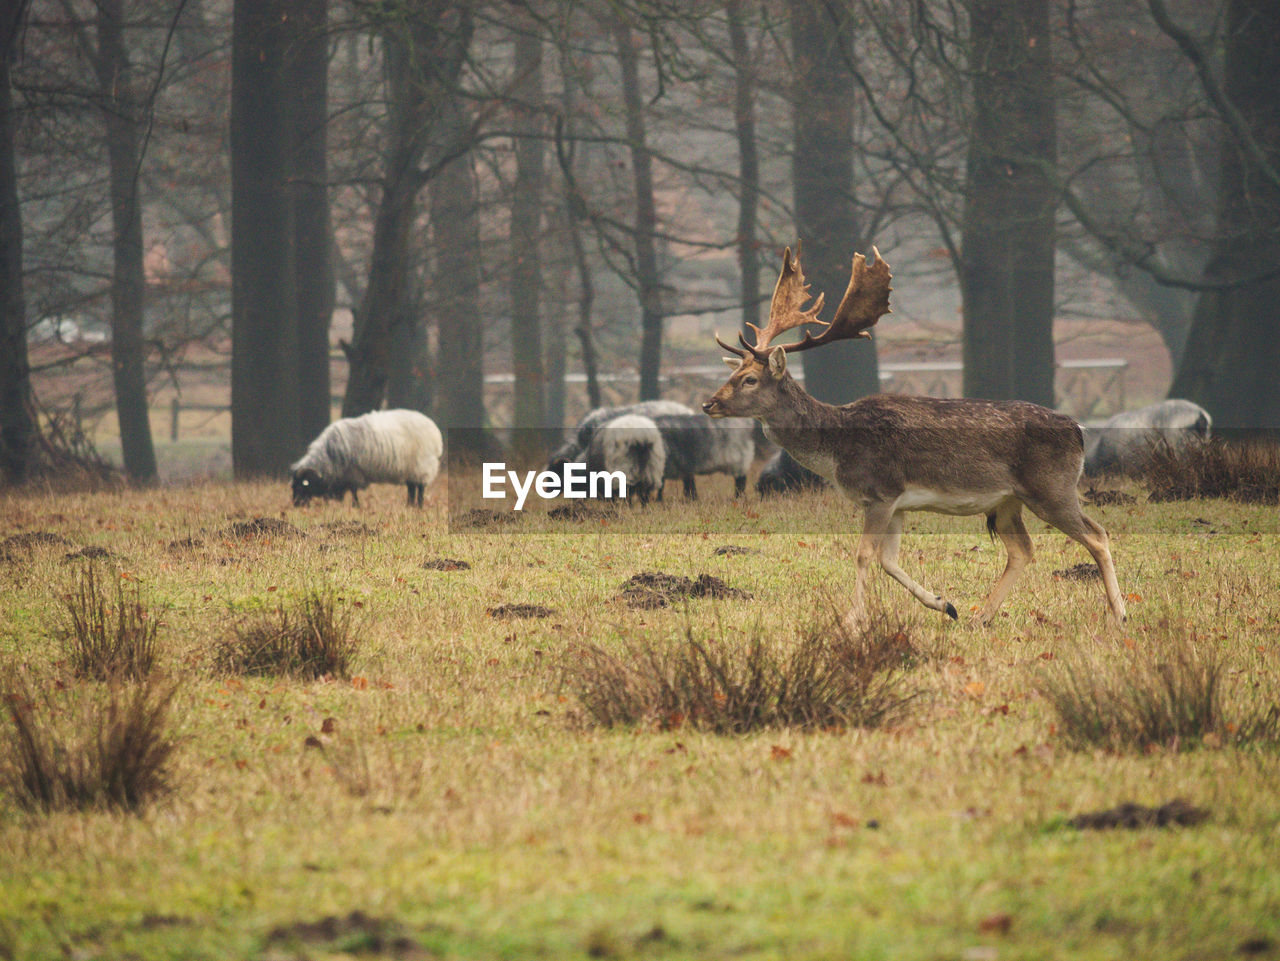 Sheep grazing in a field with a deer in front 